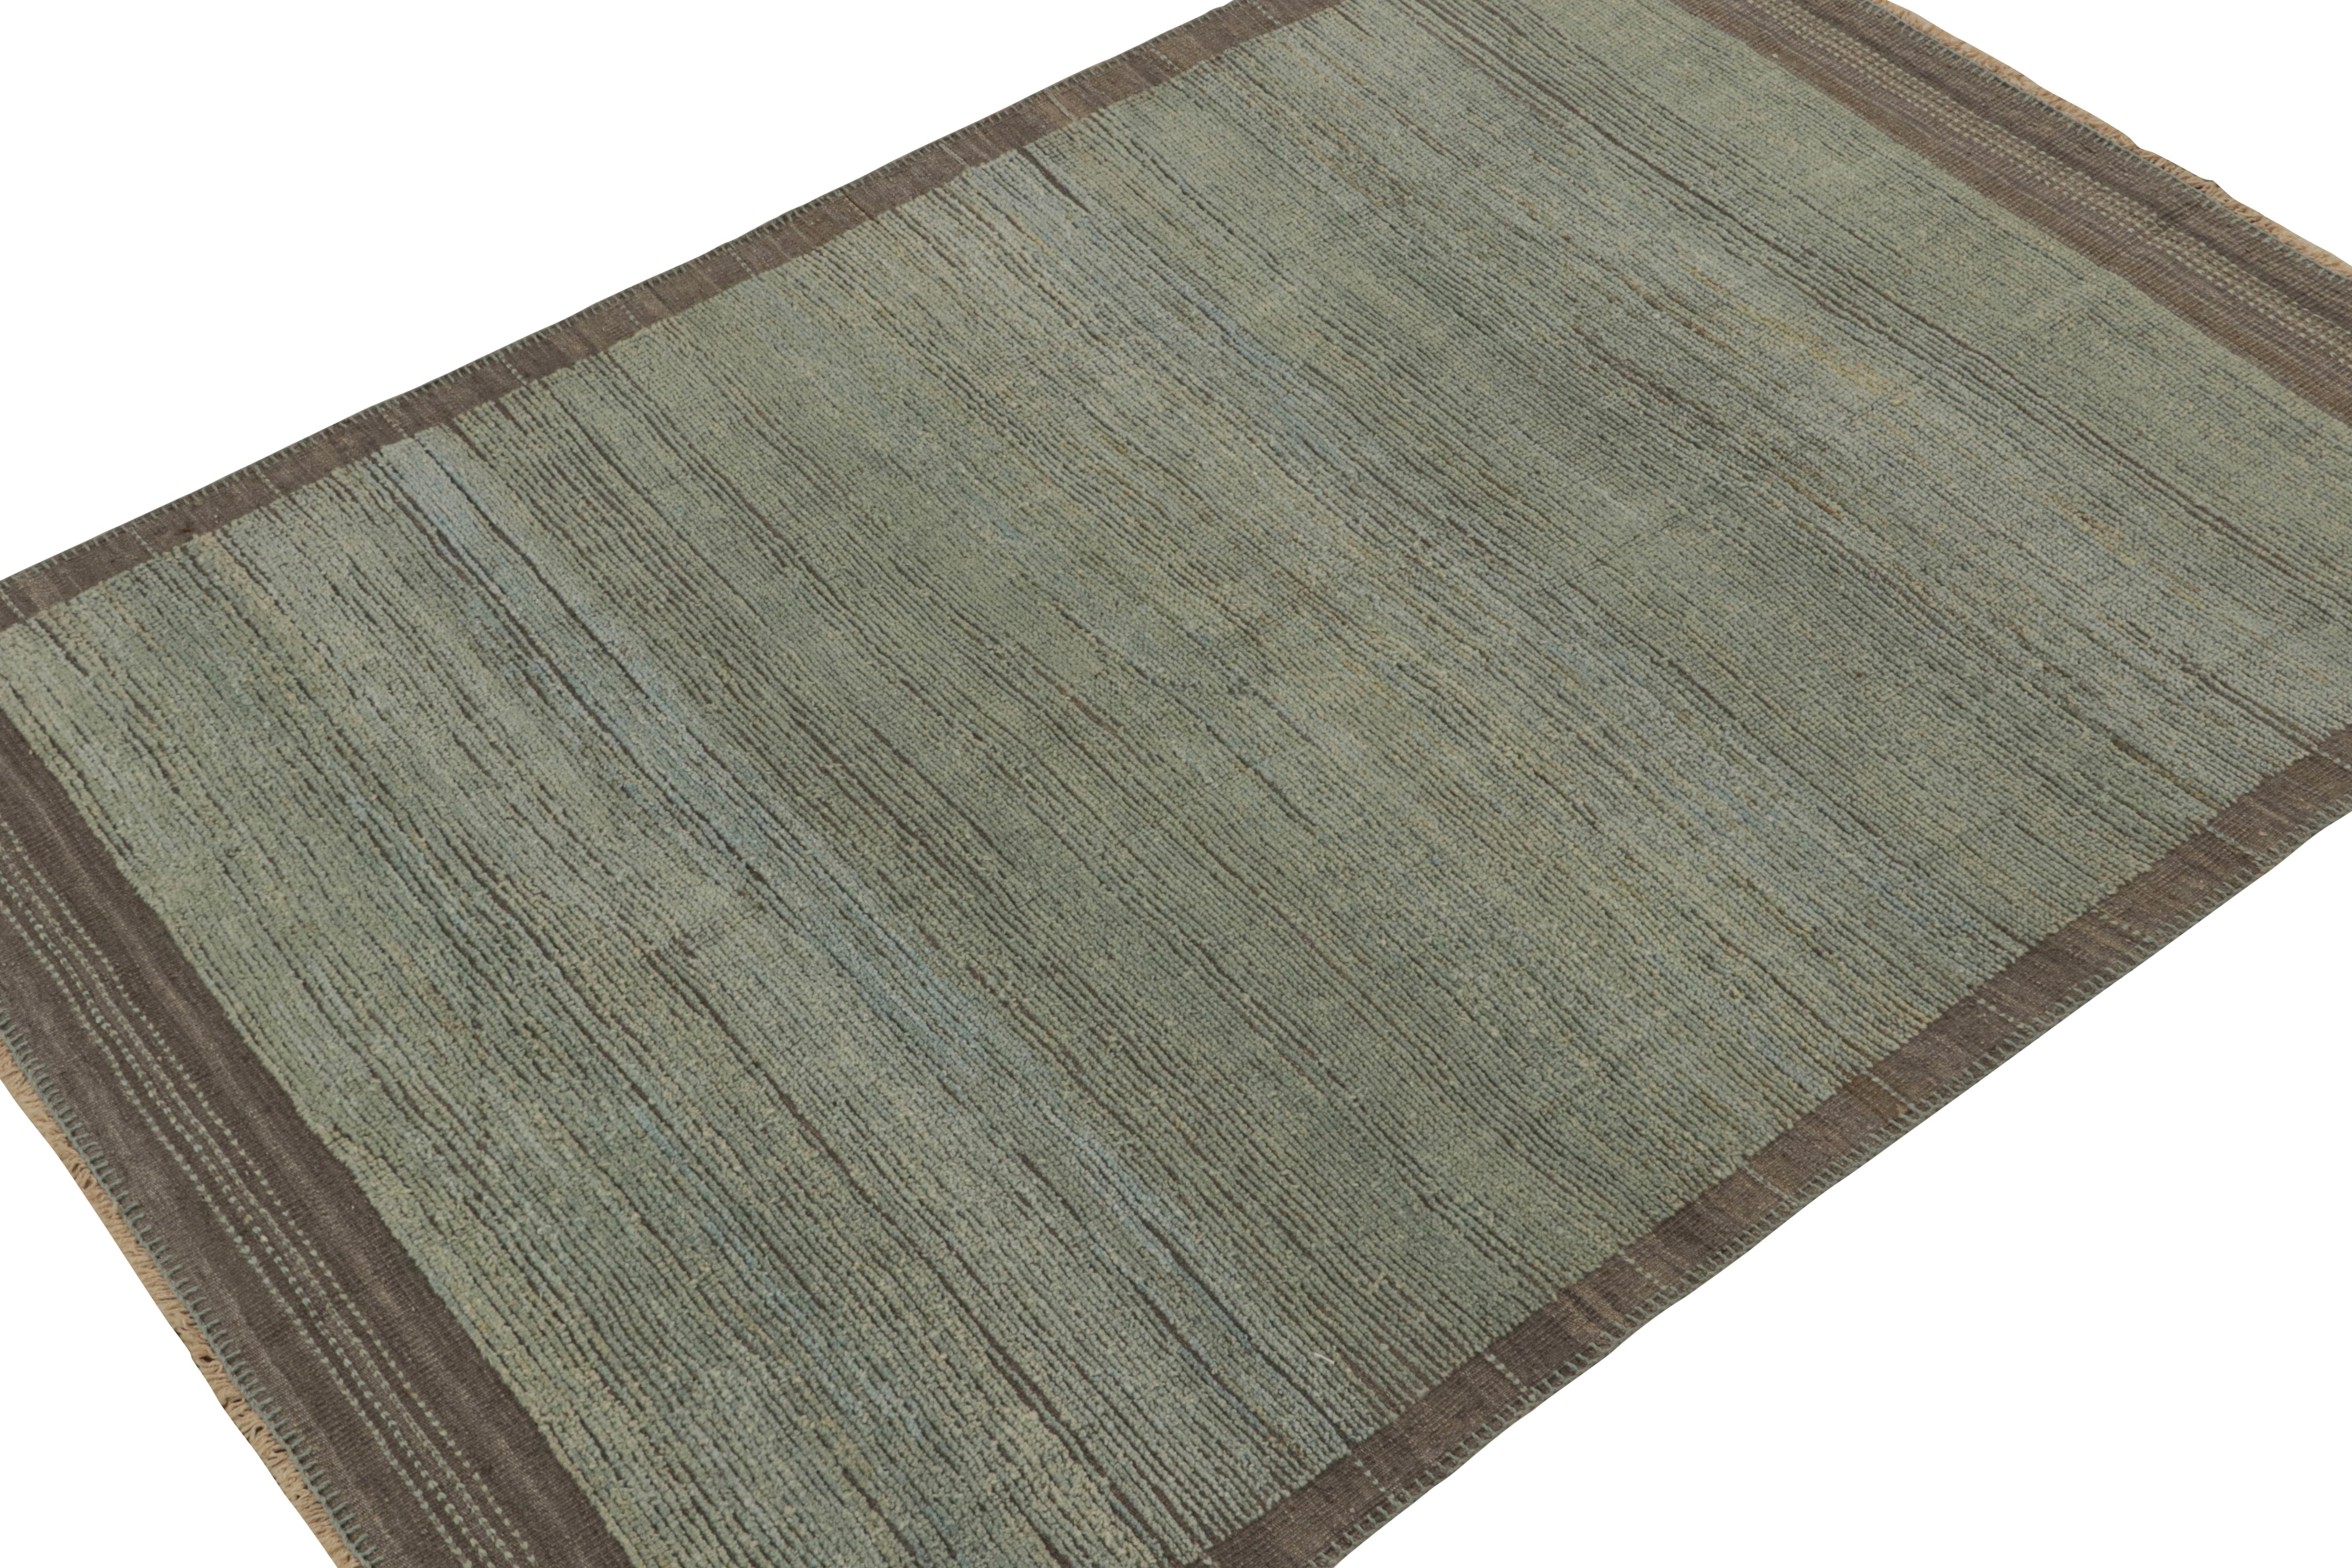 Handwoven in wool, this 6×8 rug is from a bold new line of contemporary rugs by Rug & Kilim.

Further On the Design:

This new addition to “Rez Kilim” is a play of pile and flat weave together in green, blue & brown. Additionally, this is the first